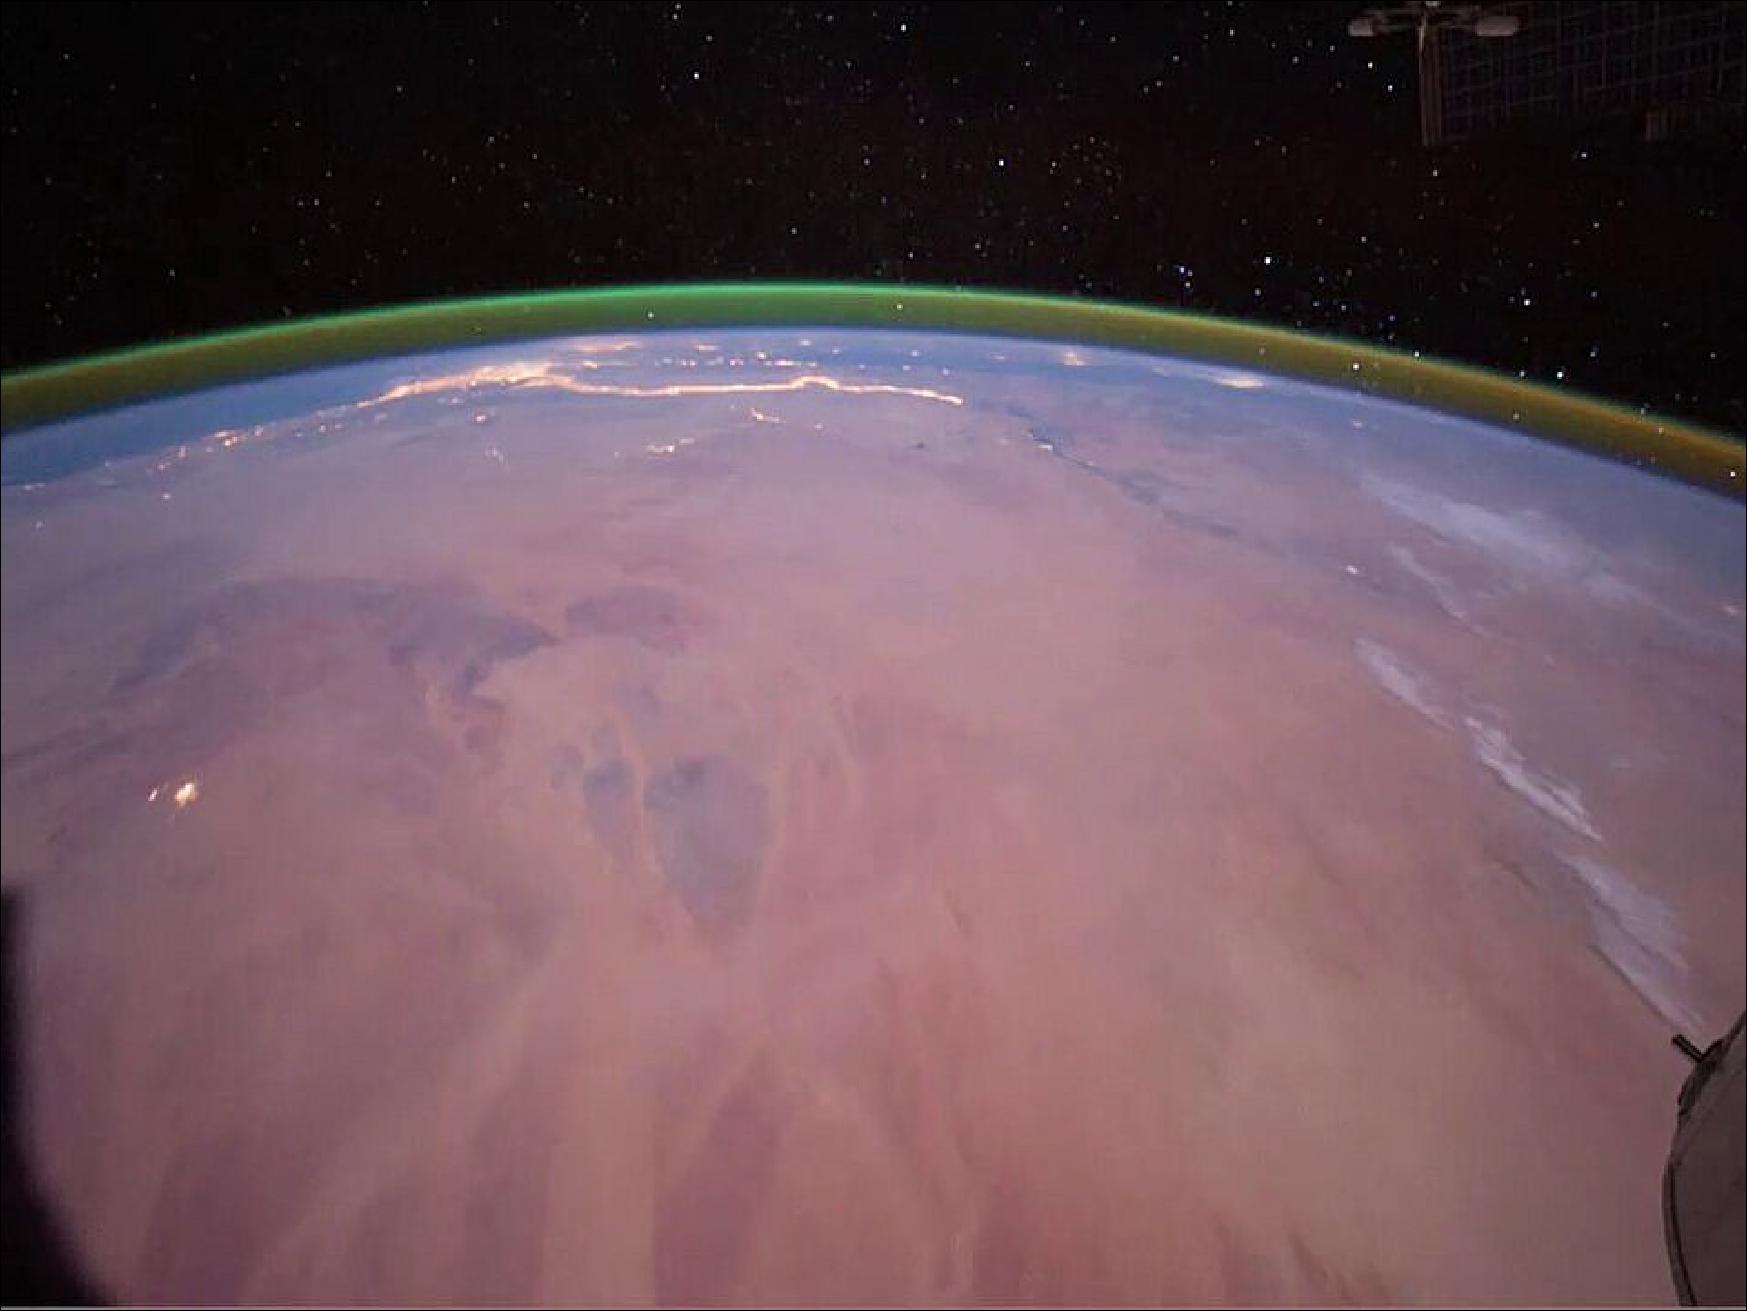 Figure 51: Airglow observed from the ISS. Airglow occurs in Earth's atmospheres as sunlight interacts with atoms and molecules within the atmosphere. In this image, taken by astronauts aboard the International Space Station (ISS) in 2011, a green band of oxygen glow is visible over Earth's curve. On the surface, portions of northern Africa are visible, with evening lights shining along the Nile river and its delta (image credit: NASA) .